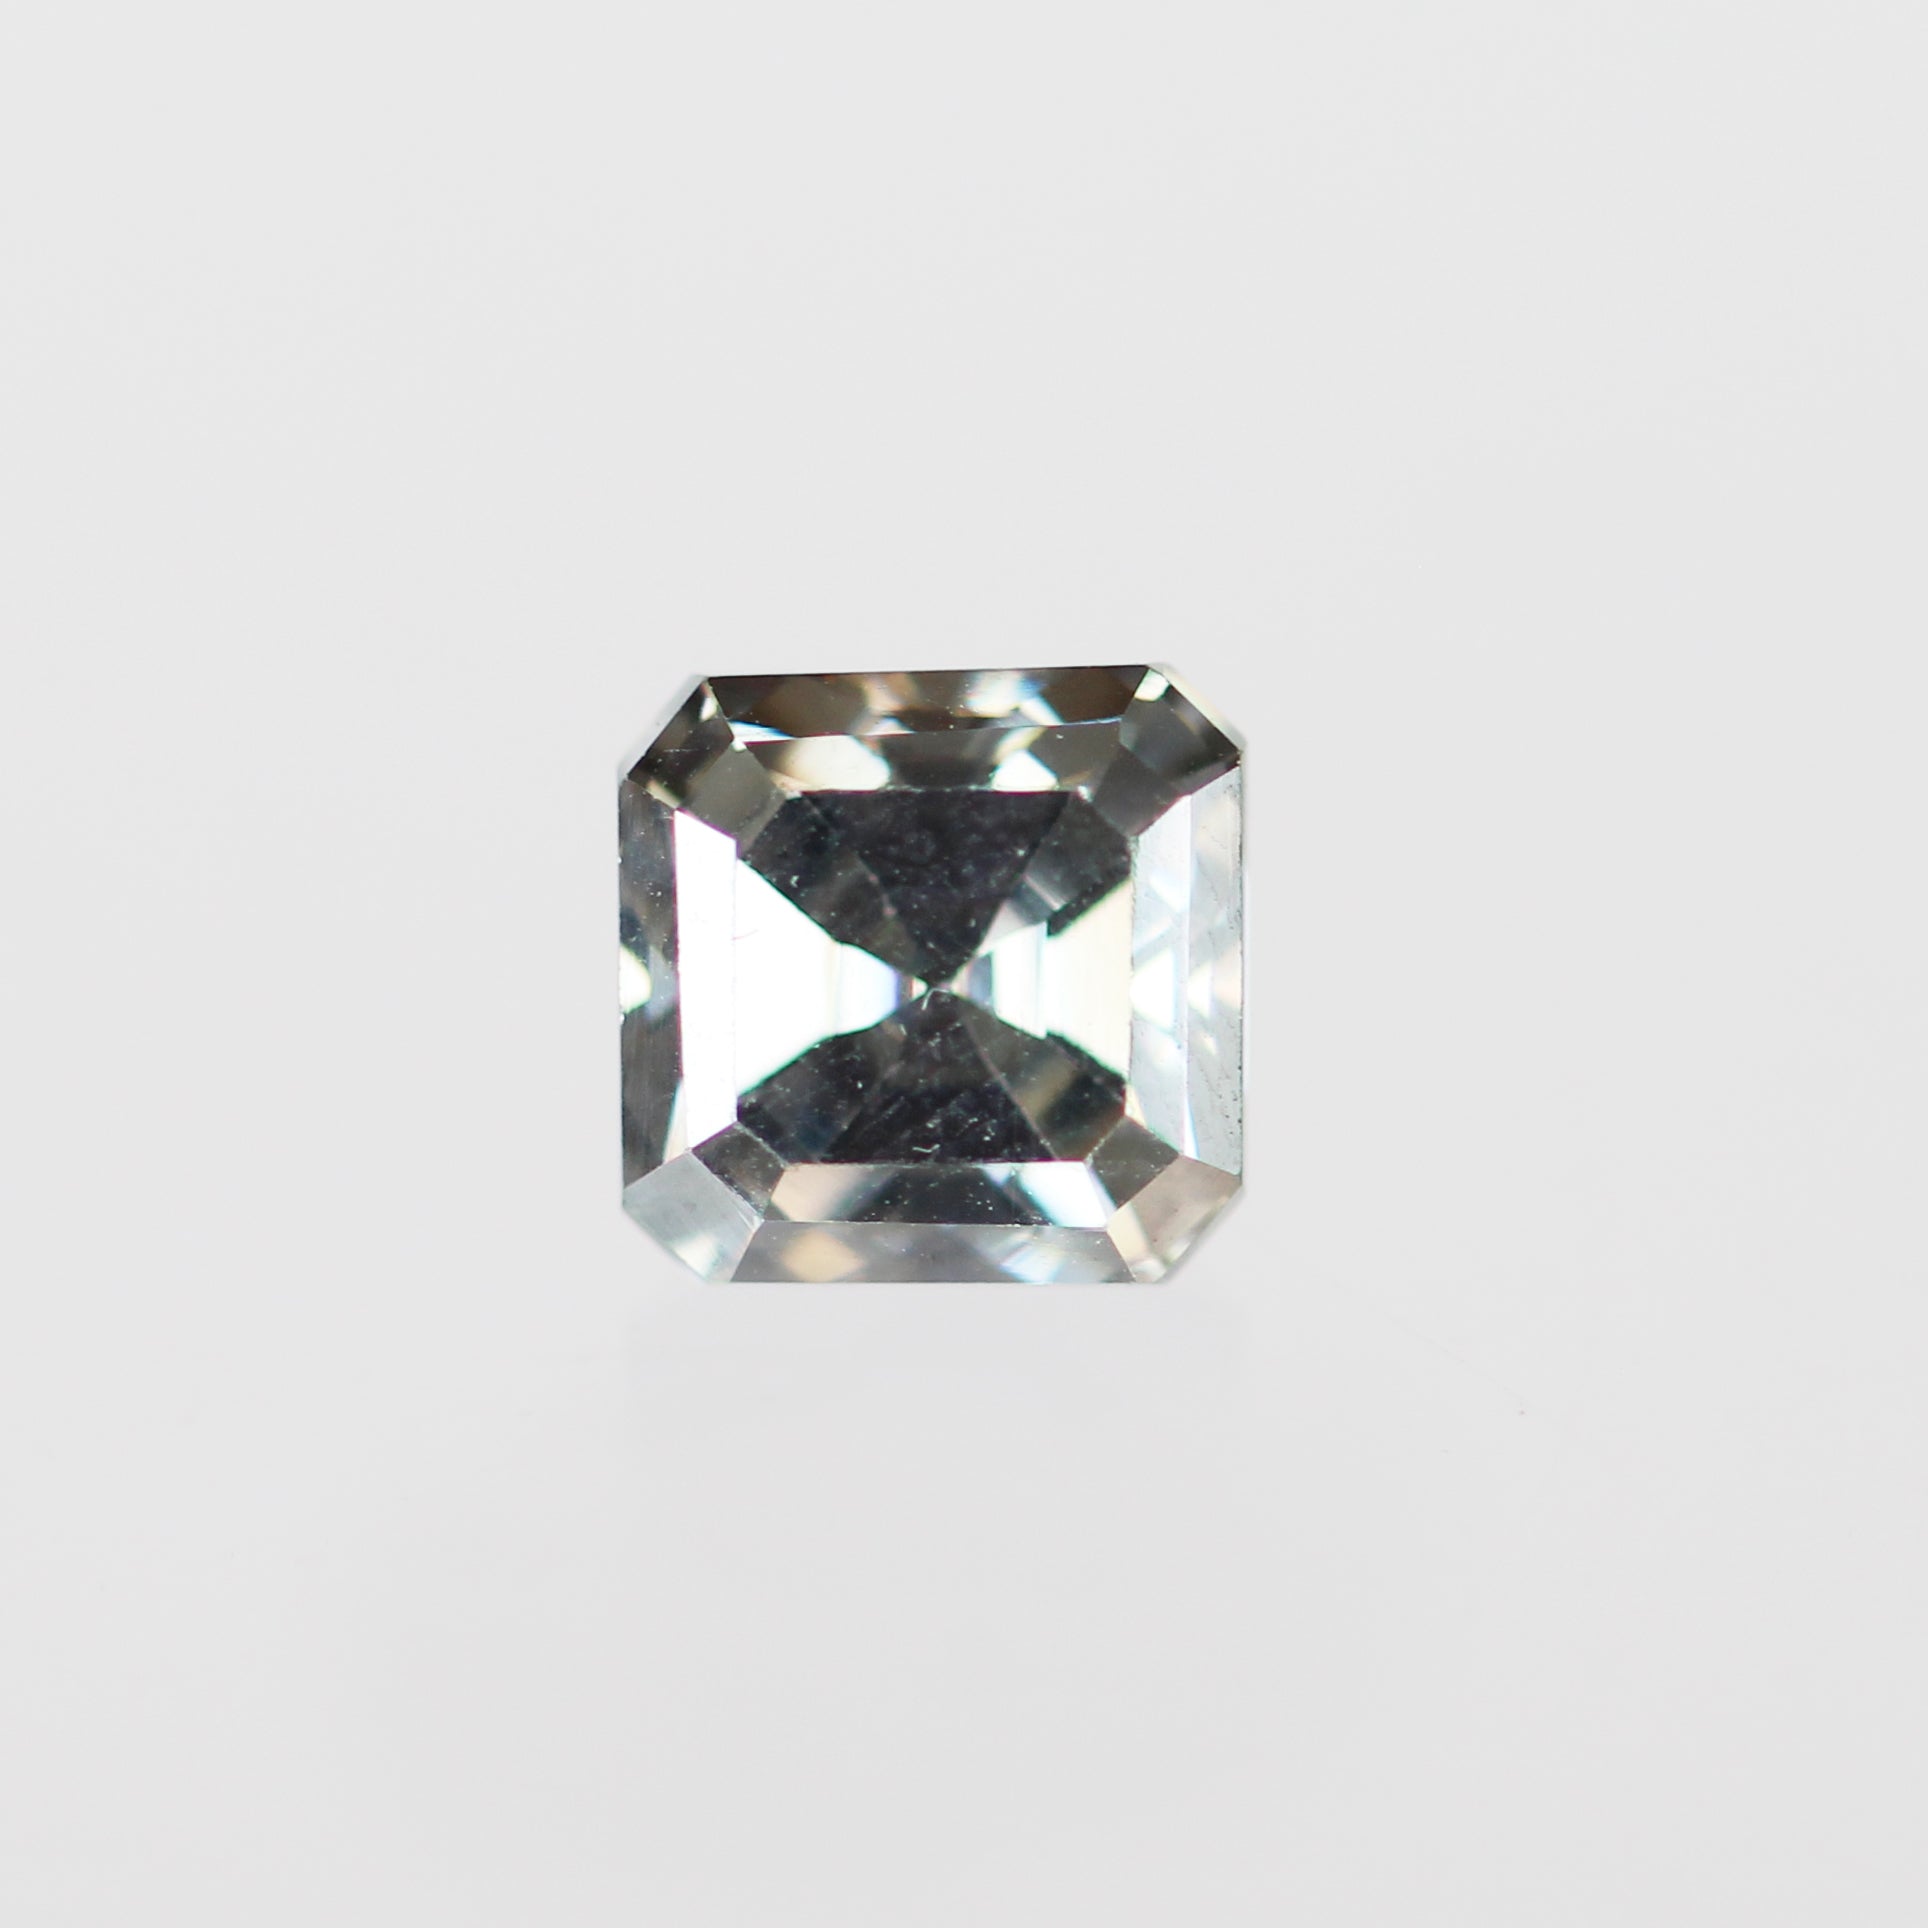 1.64 Carat Asscher Moissanite for Custom Work - Inventory Code ABMOI164 - Midwinter Co. Alternative Bridal Rings and Modern Fine Jewelry